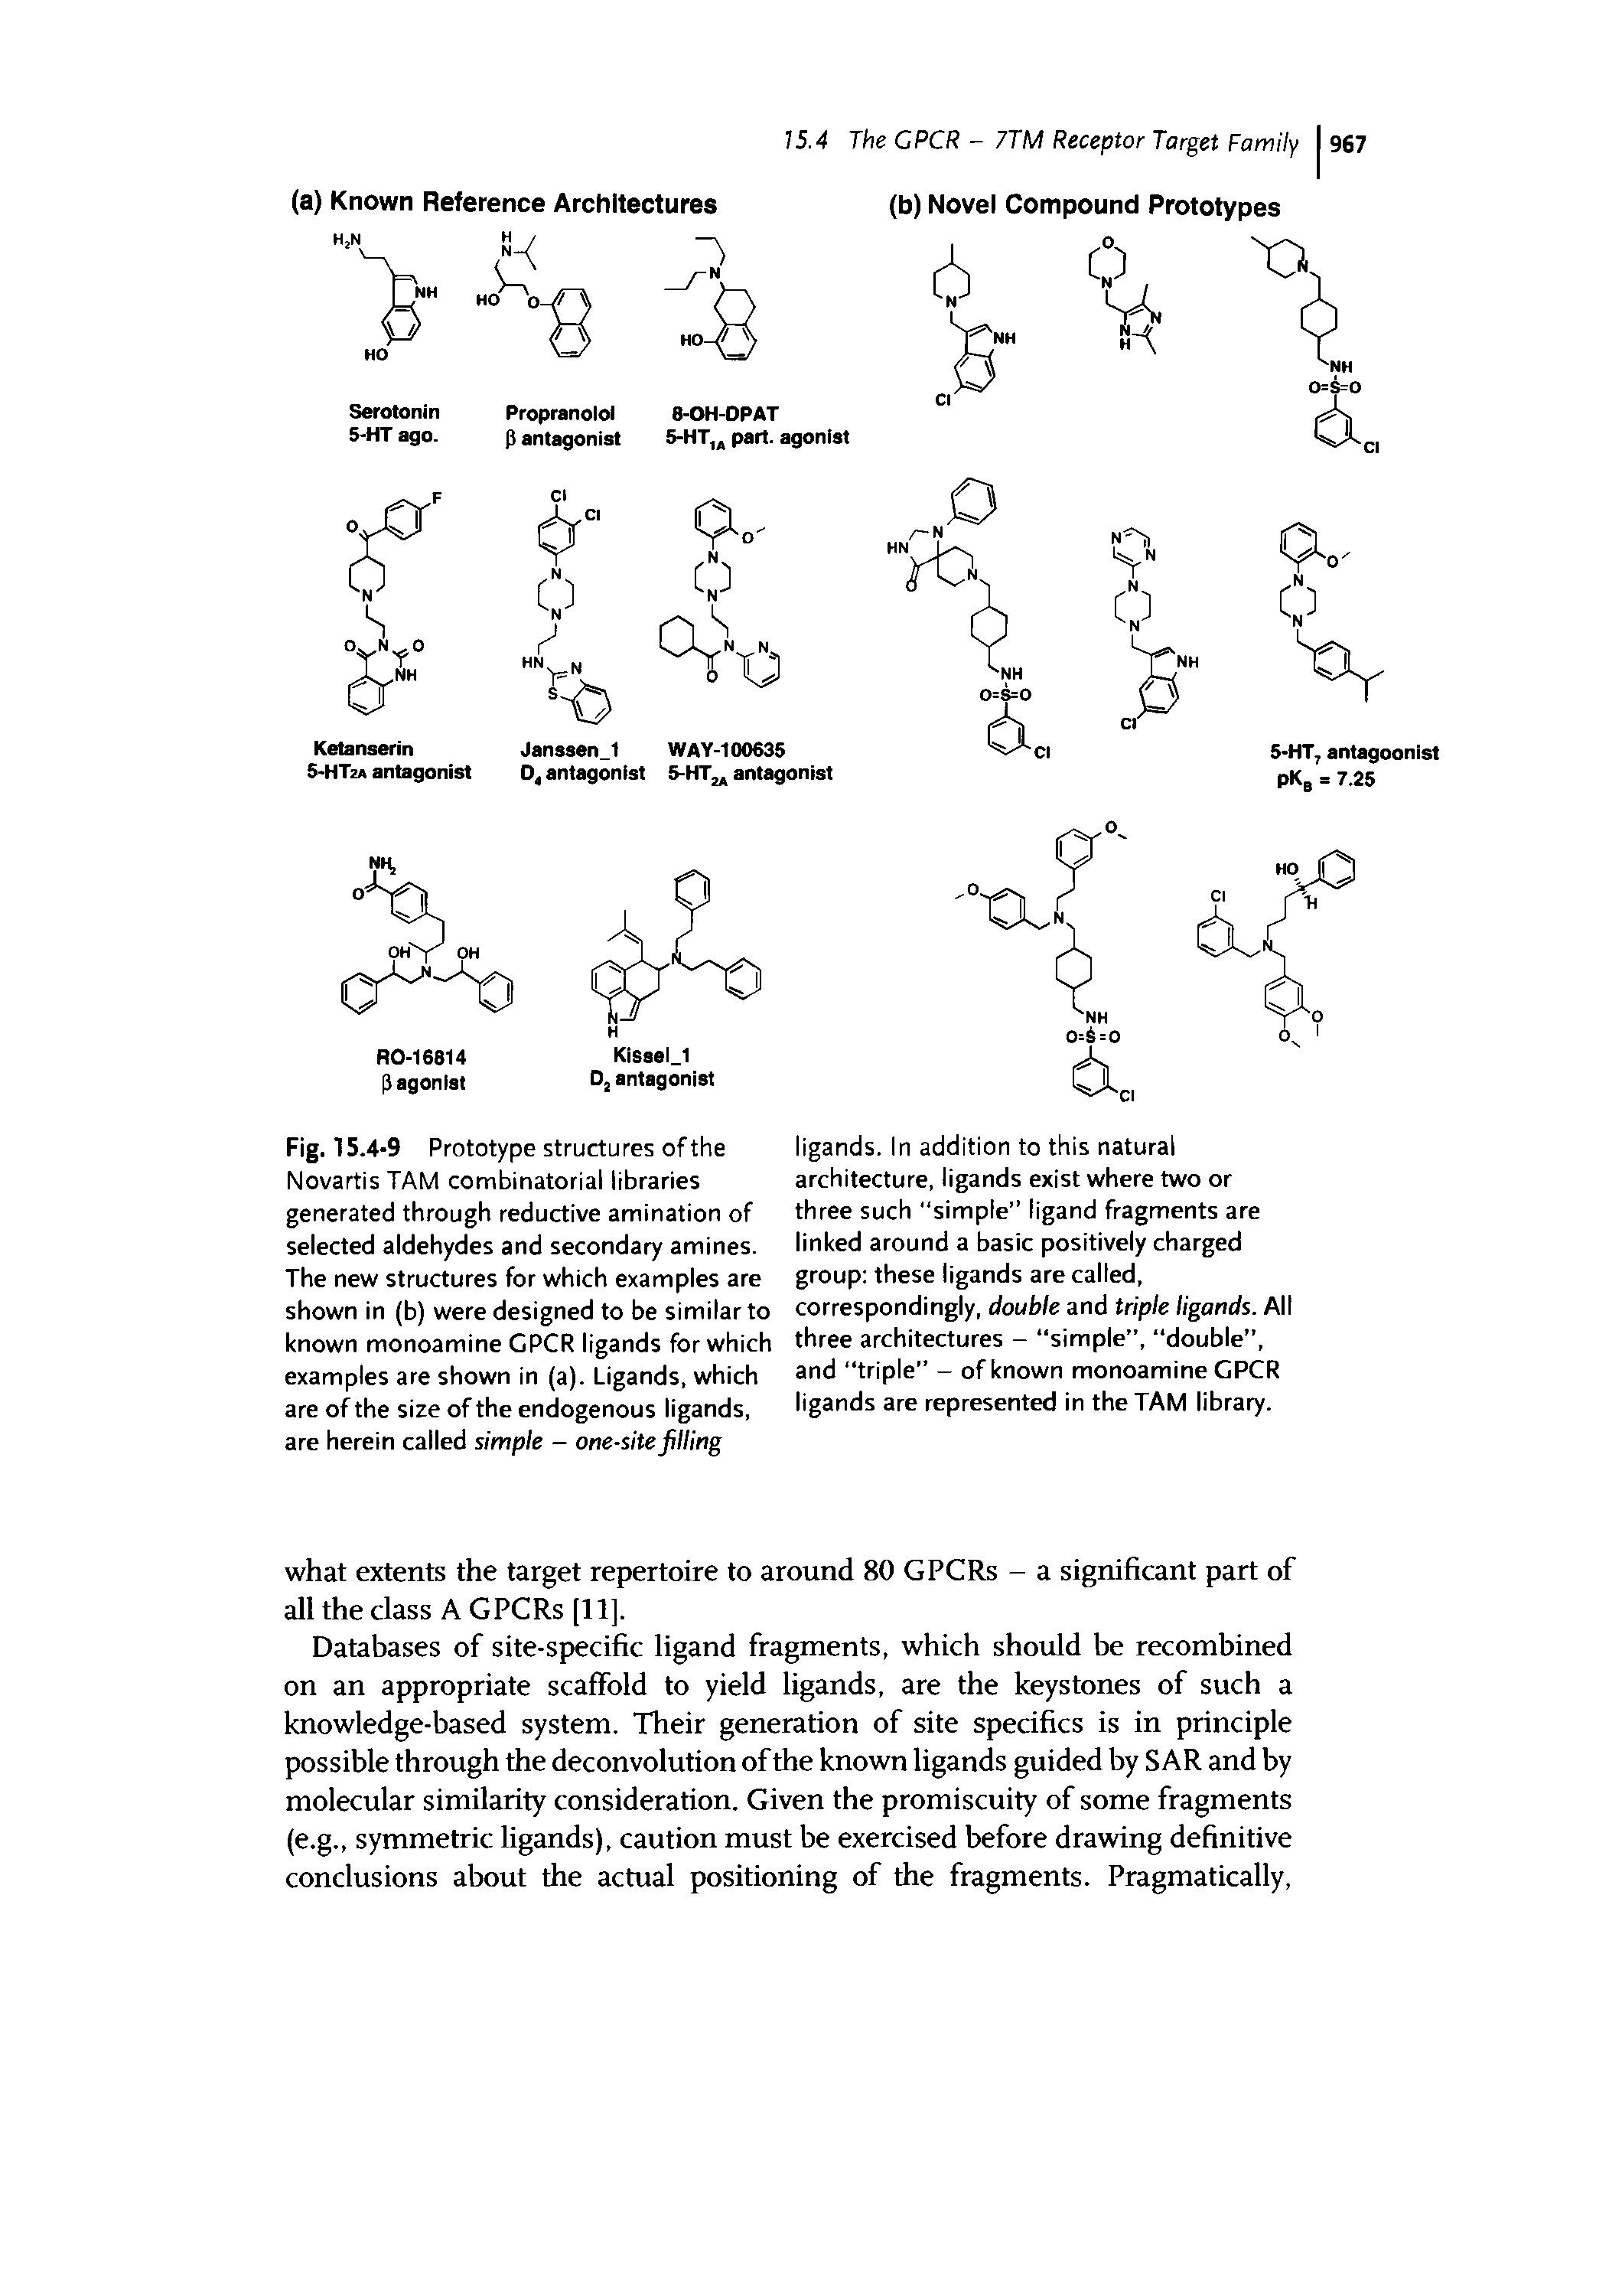 Fig. 15.4-9 Prototype structu res of the Novartis TAM combinatorial libraries generated through reductive amination of selected aldehydes and secondary amines. The new structures for which examples are shown in (b) were designed to be similar to known monoamine CPCR ligands for which examples are shown in (a). Ligands, which are of the size of the endogenous ligands, are herein called simple - one-site filling...